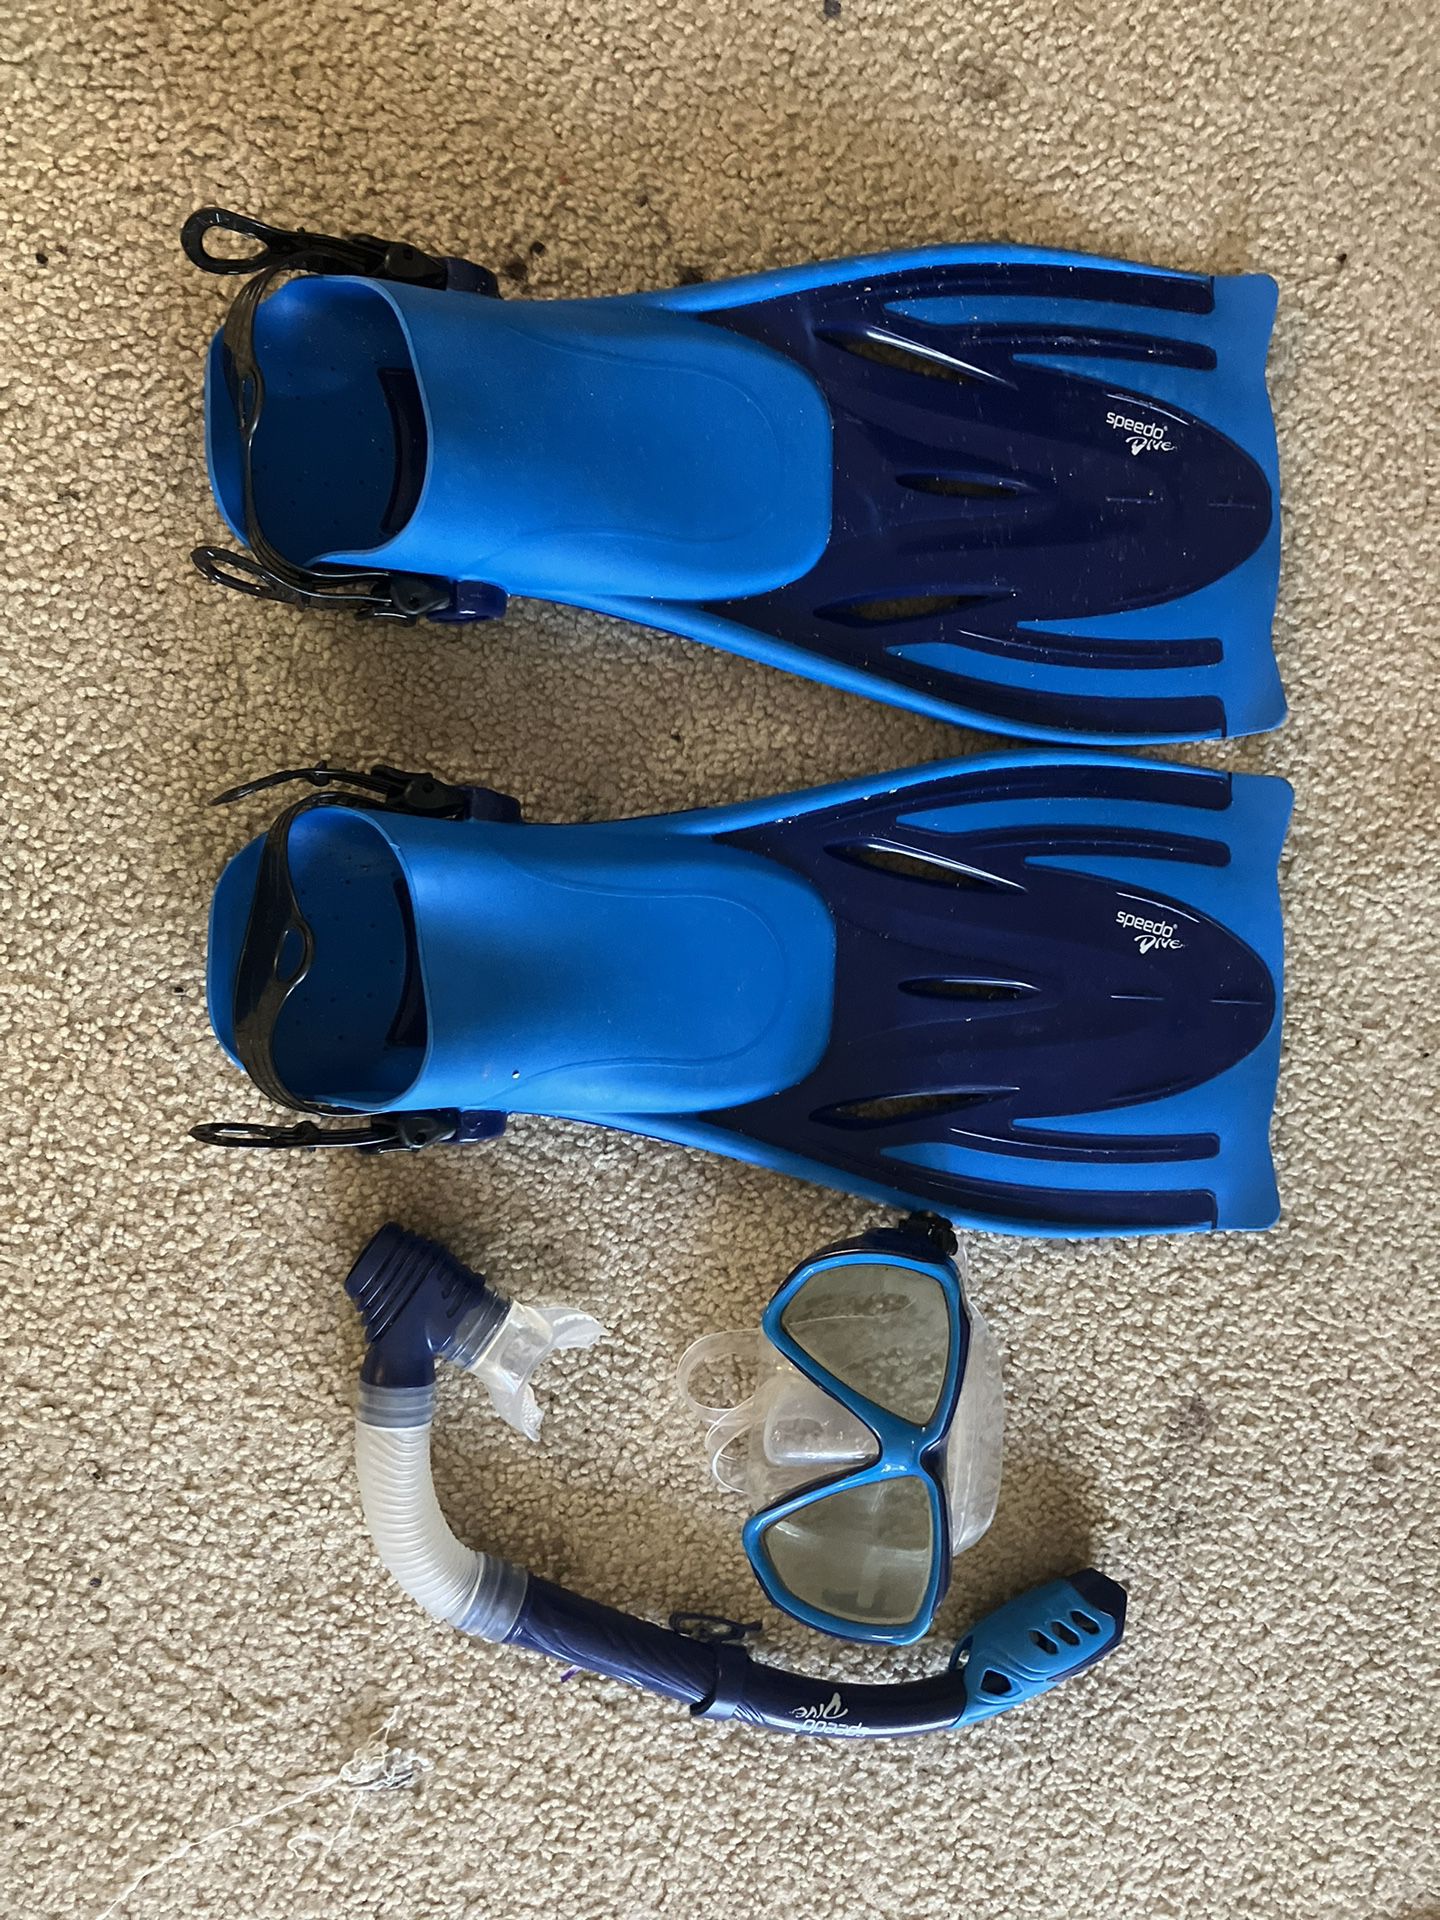 Snorkel Kit For Adult Rarely Used